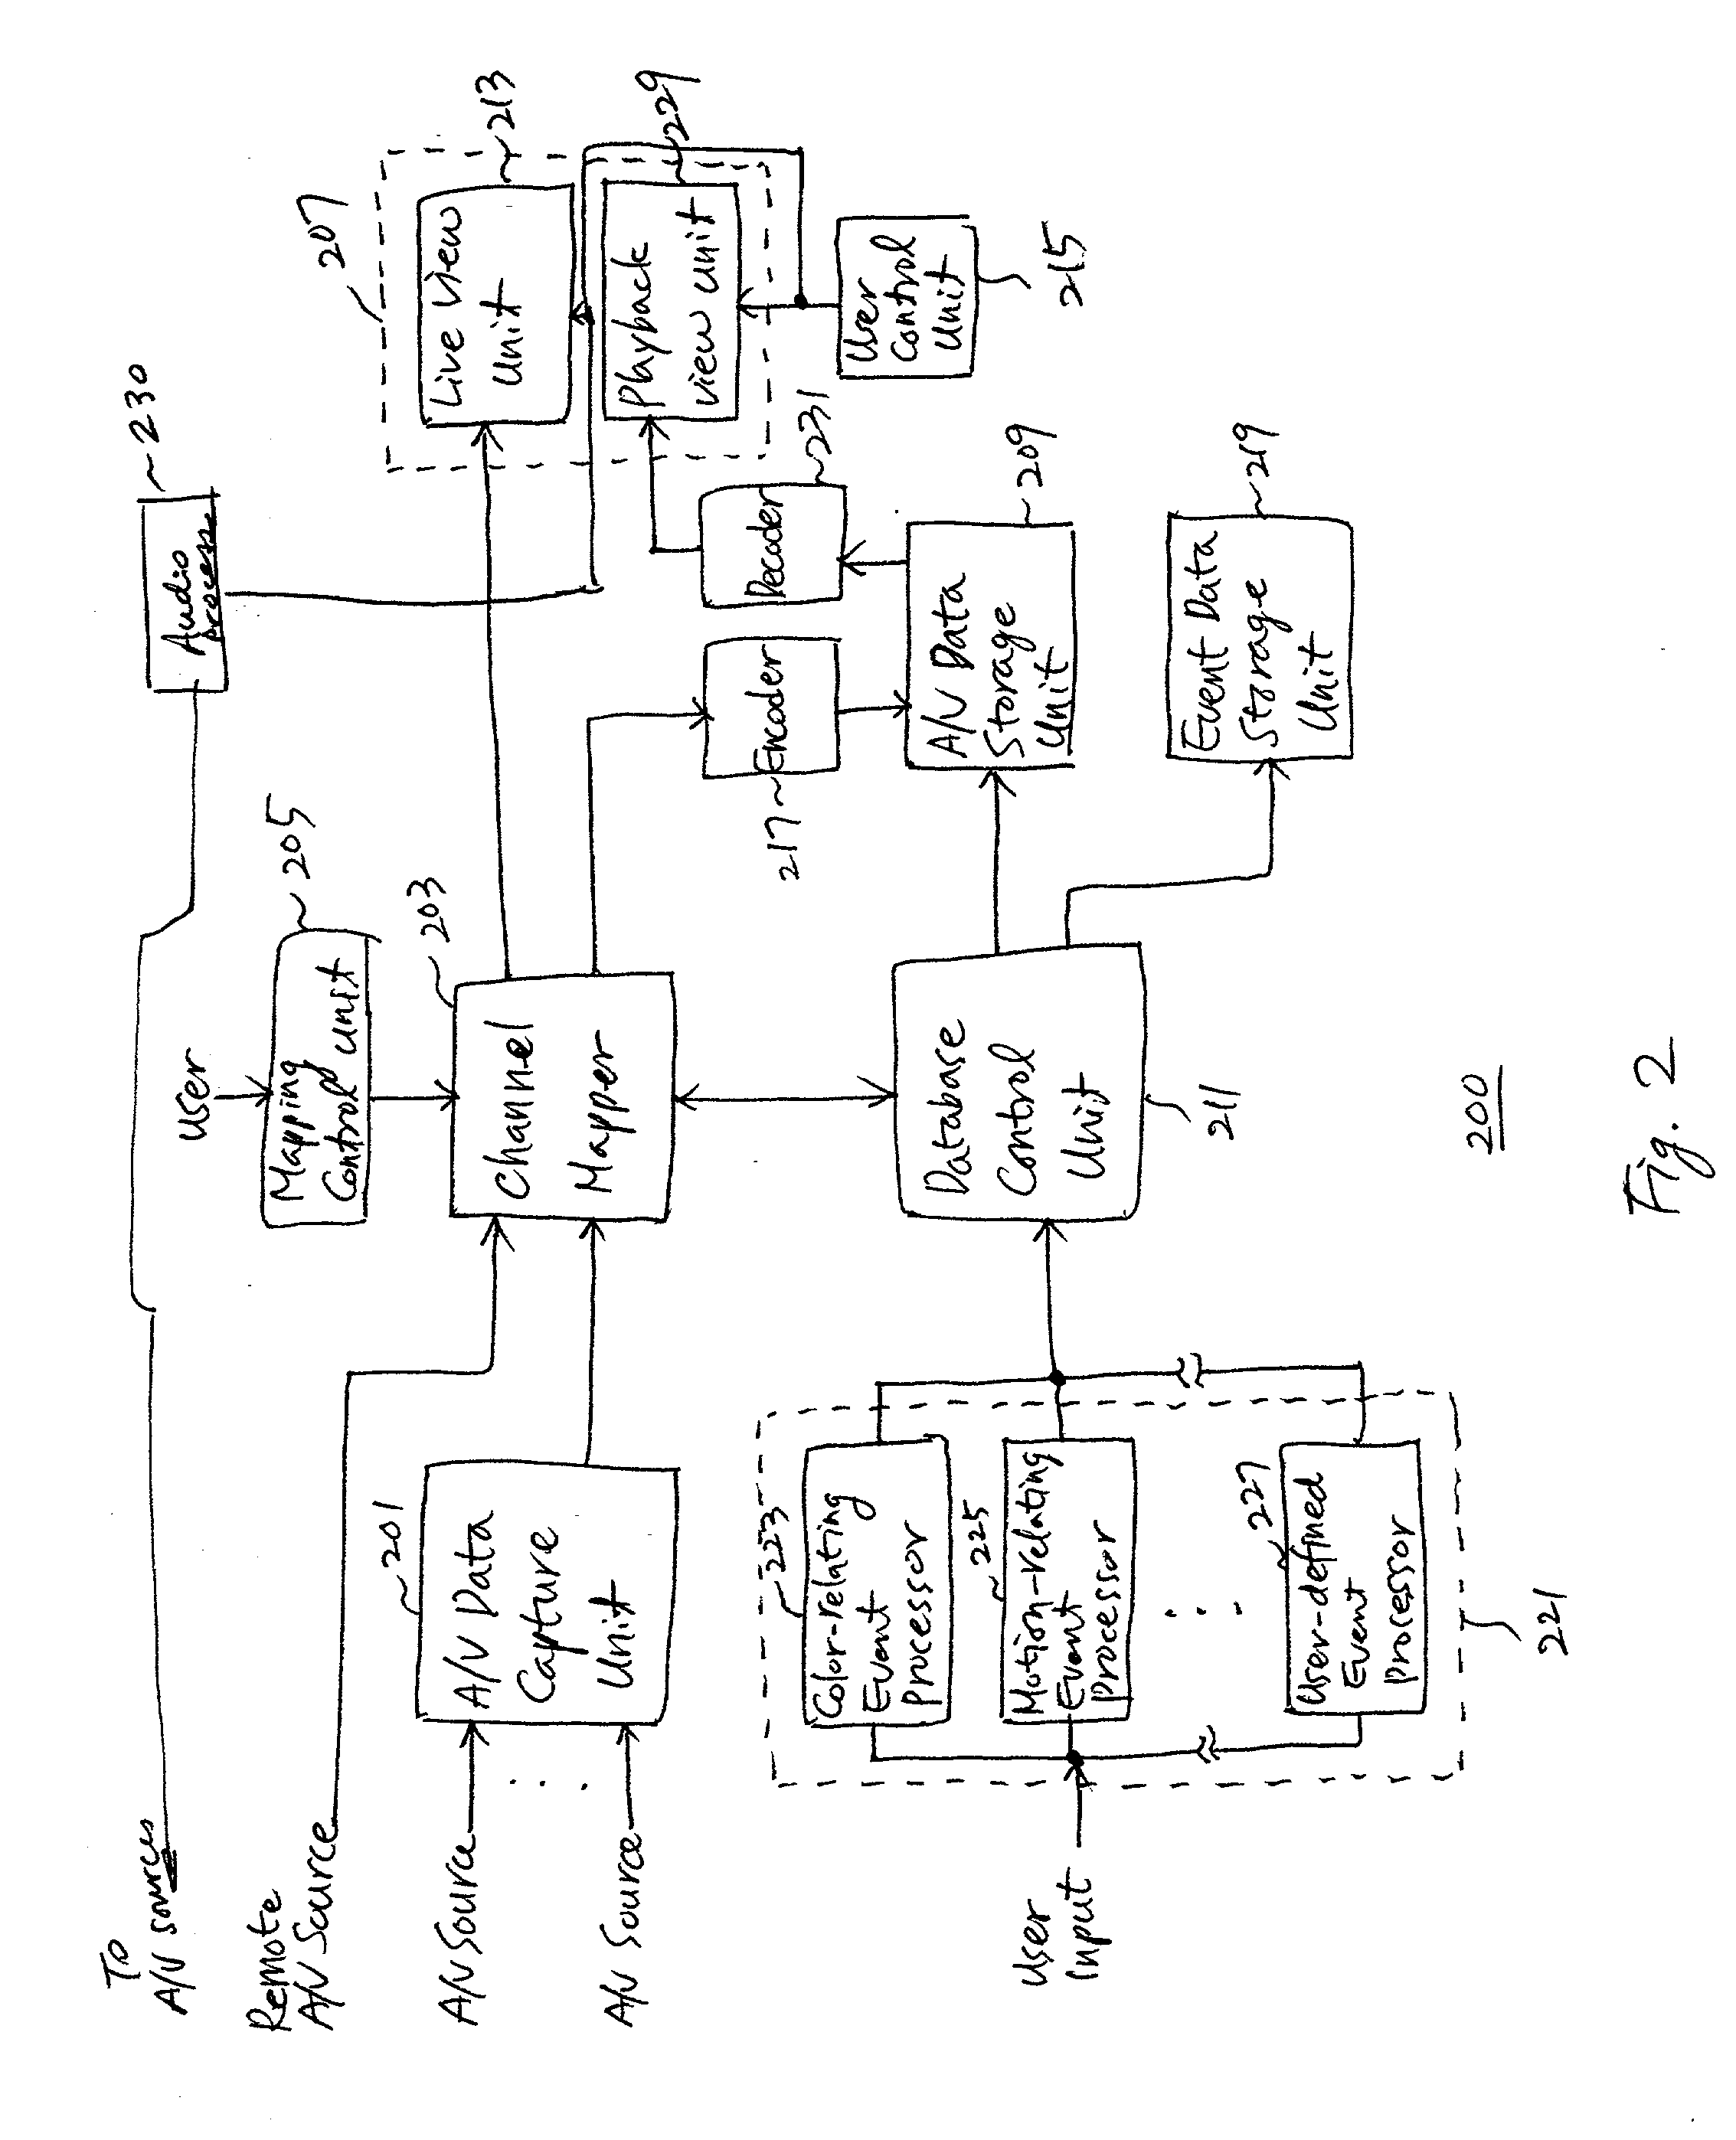 System and method of processing audio/video data in a remote monitoring system